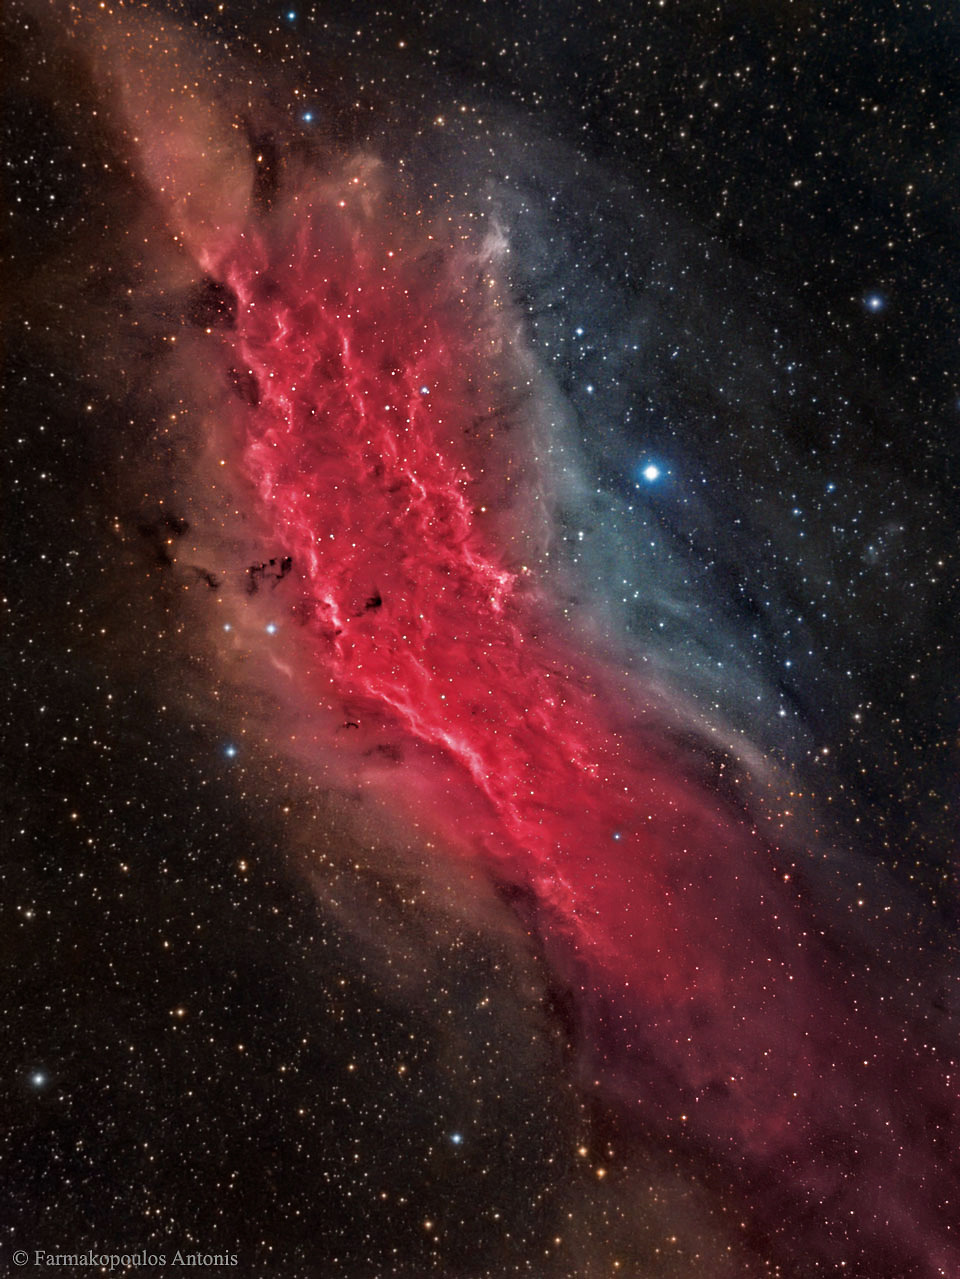 The California Nebula NGC 1499
A classic emission nebula around 100 light-years long. Drifting through the Orion Arm of the spiral Milky Way Galaxy, this cosmic cloud by chance echoes the outline of California on the west coast of the United States....